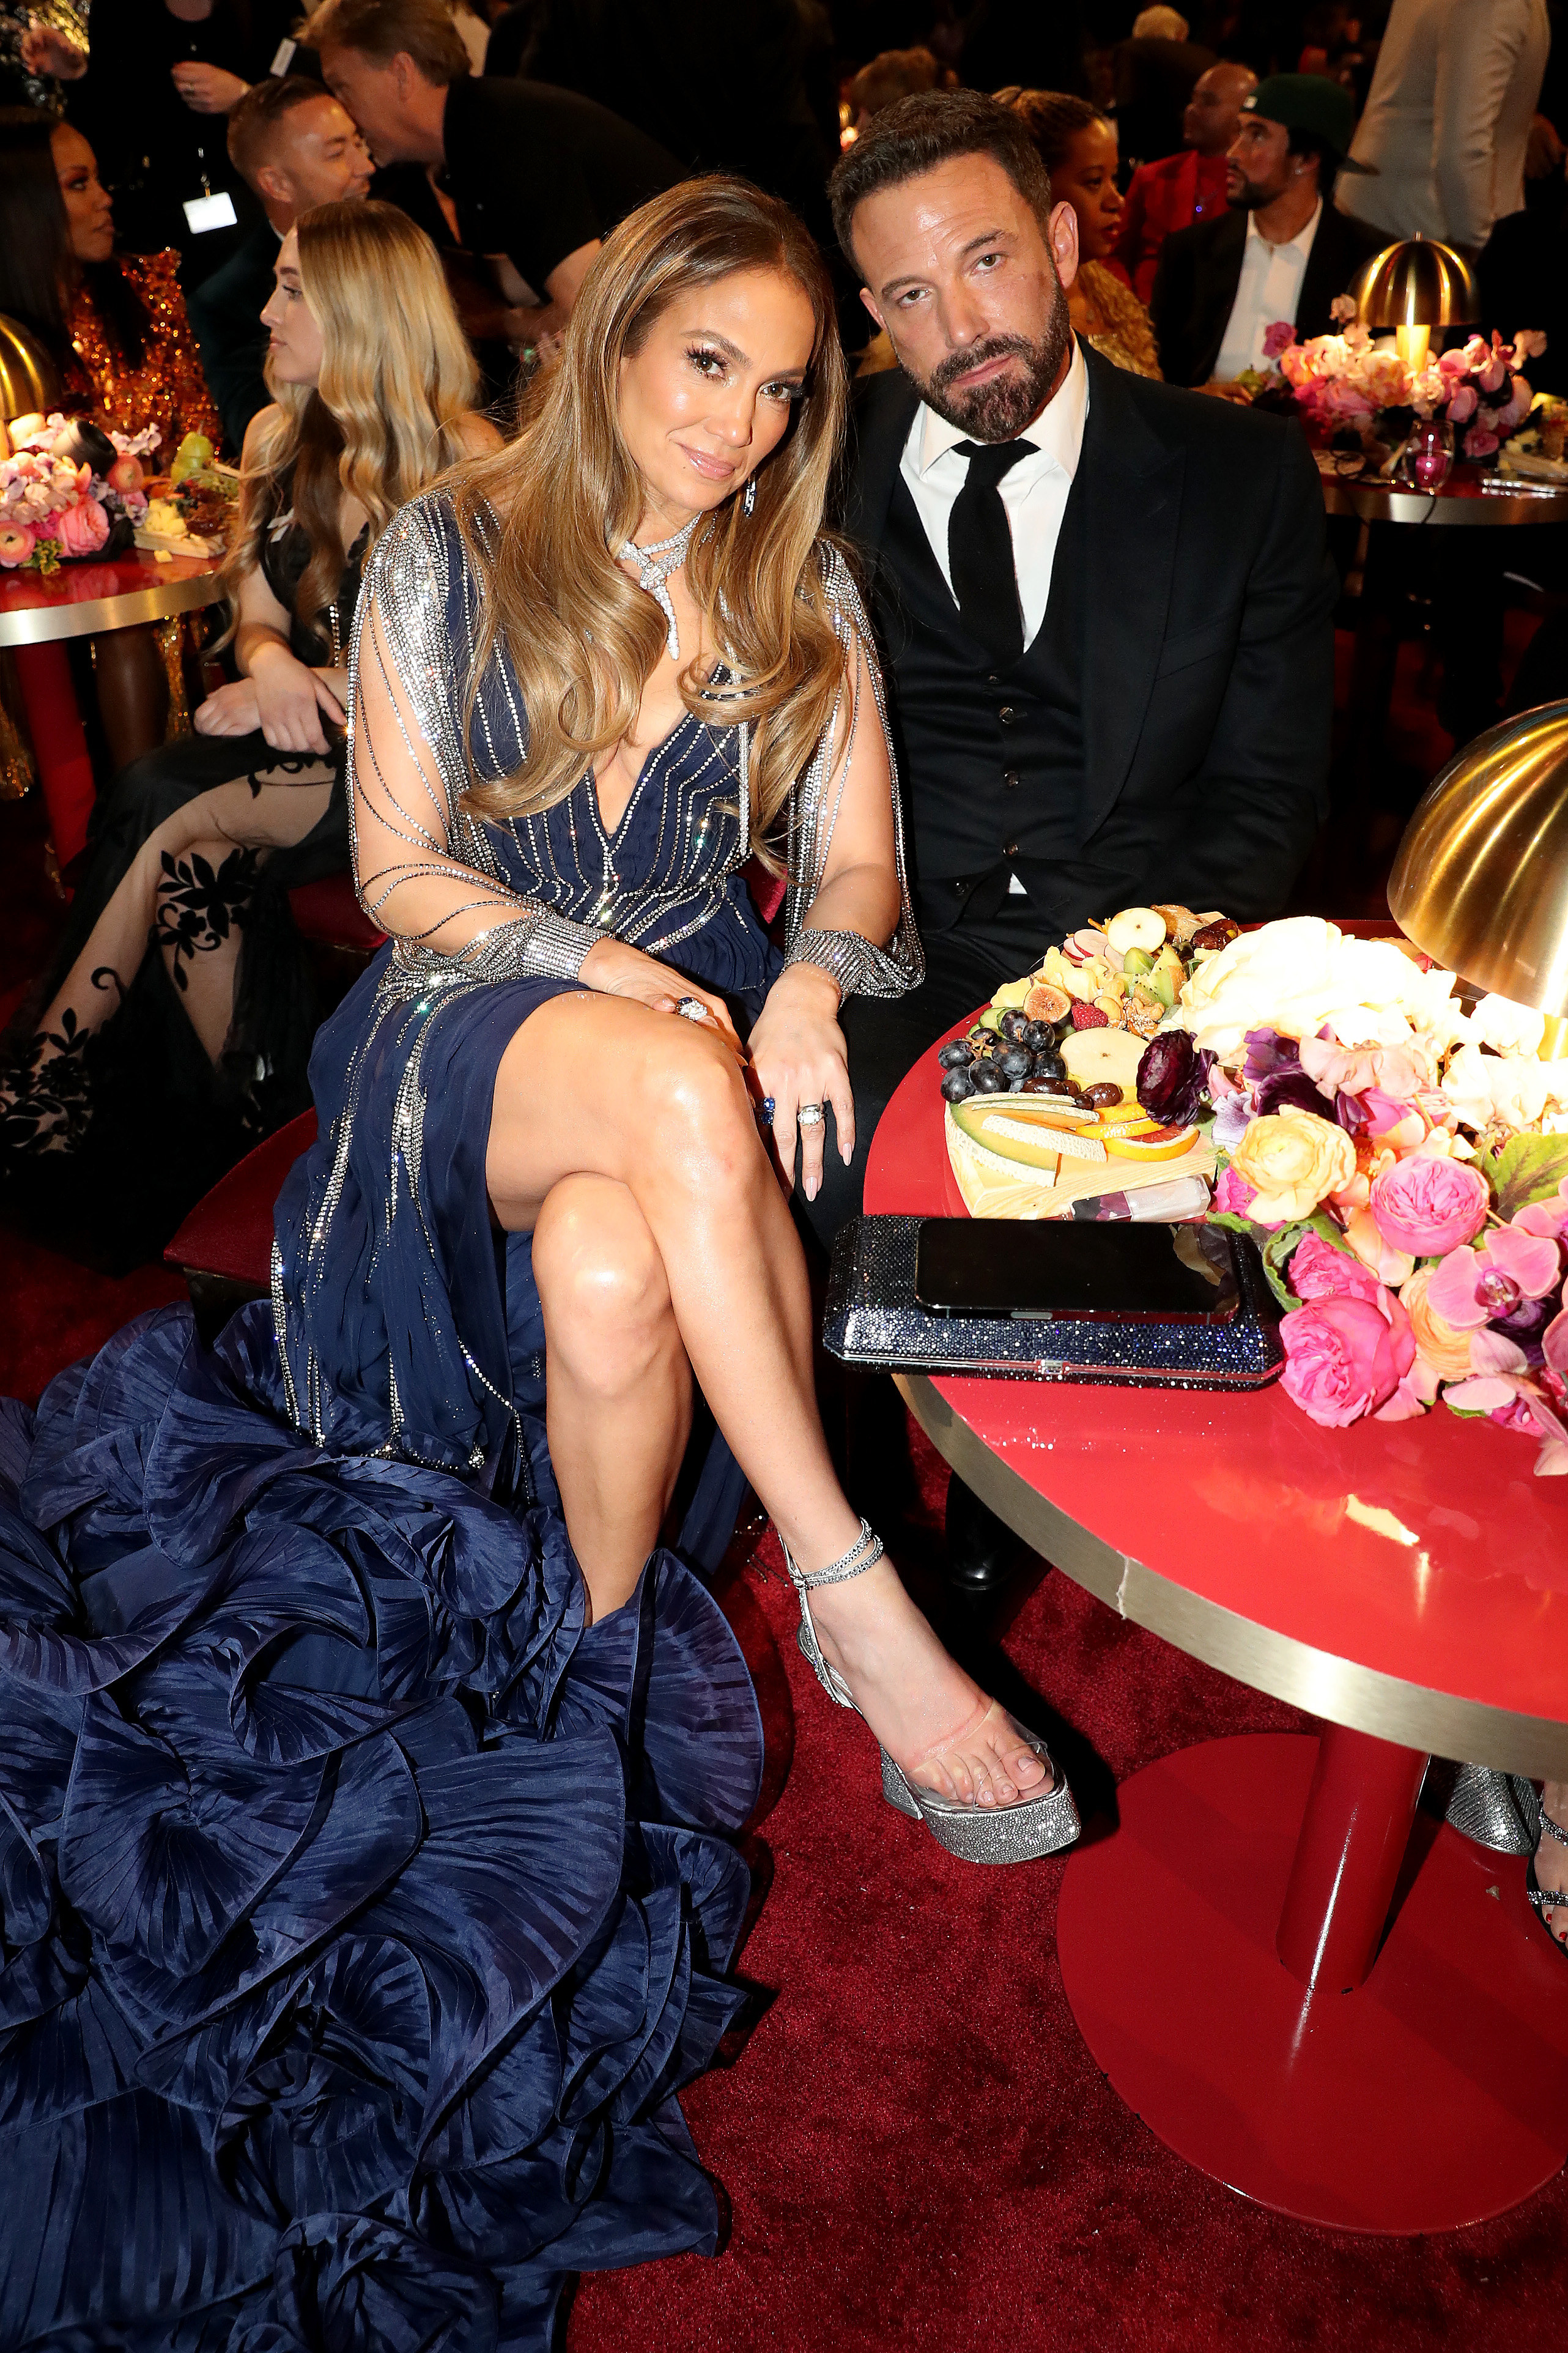 the couple sitting at a table during an awards show